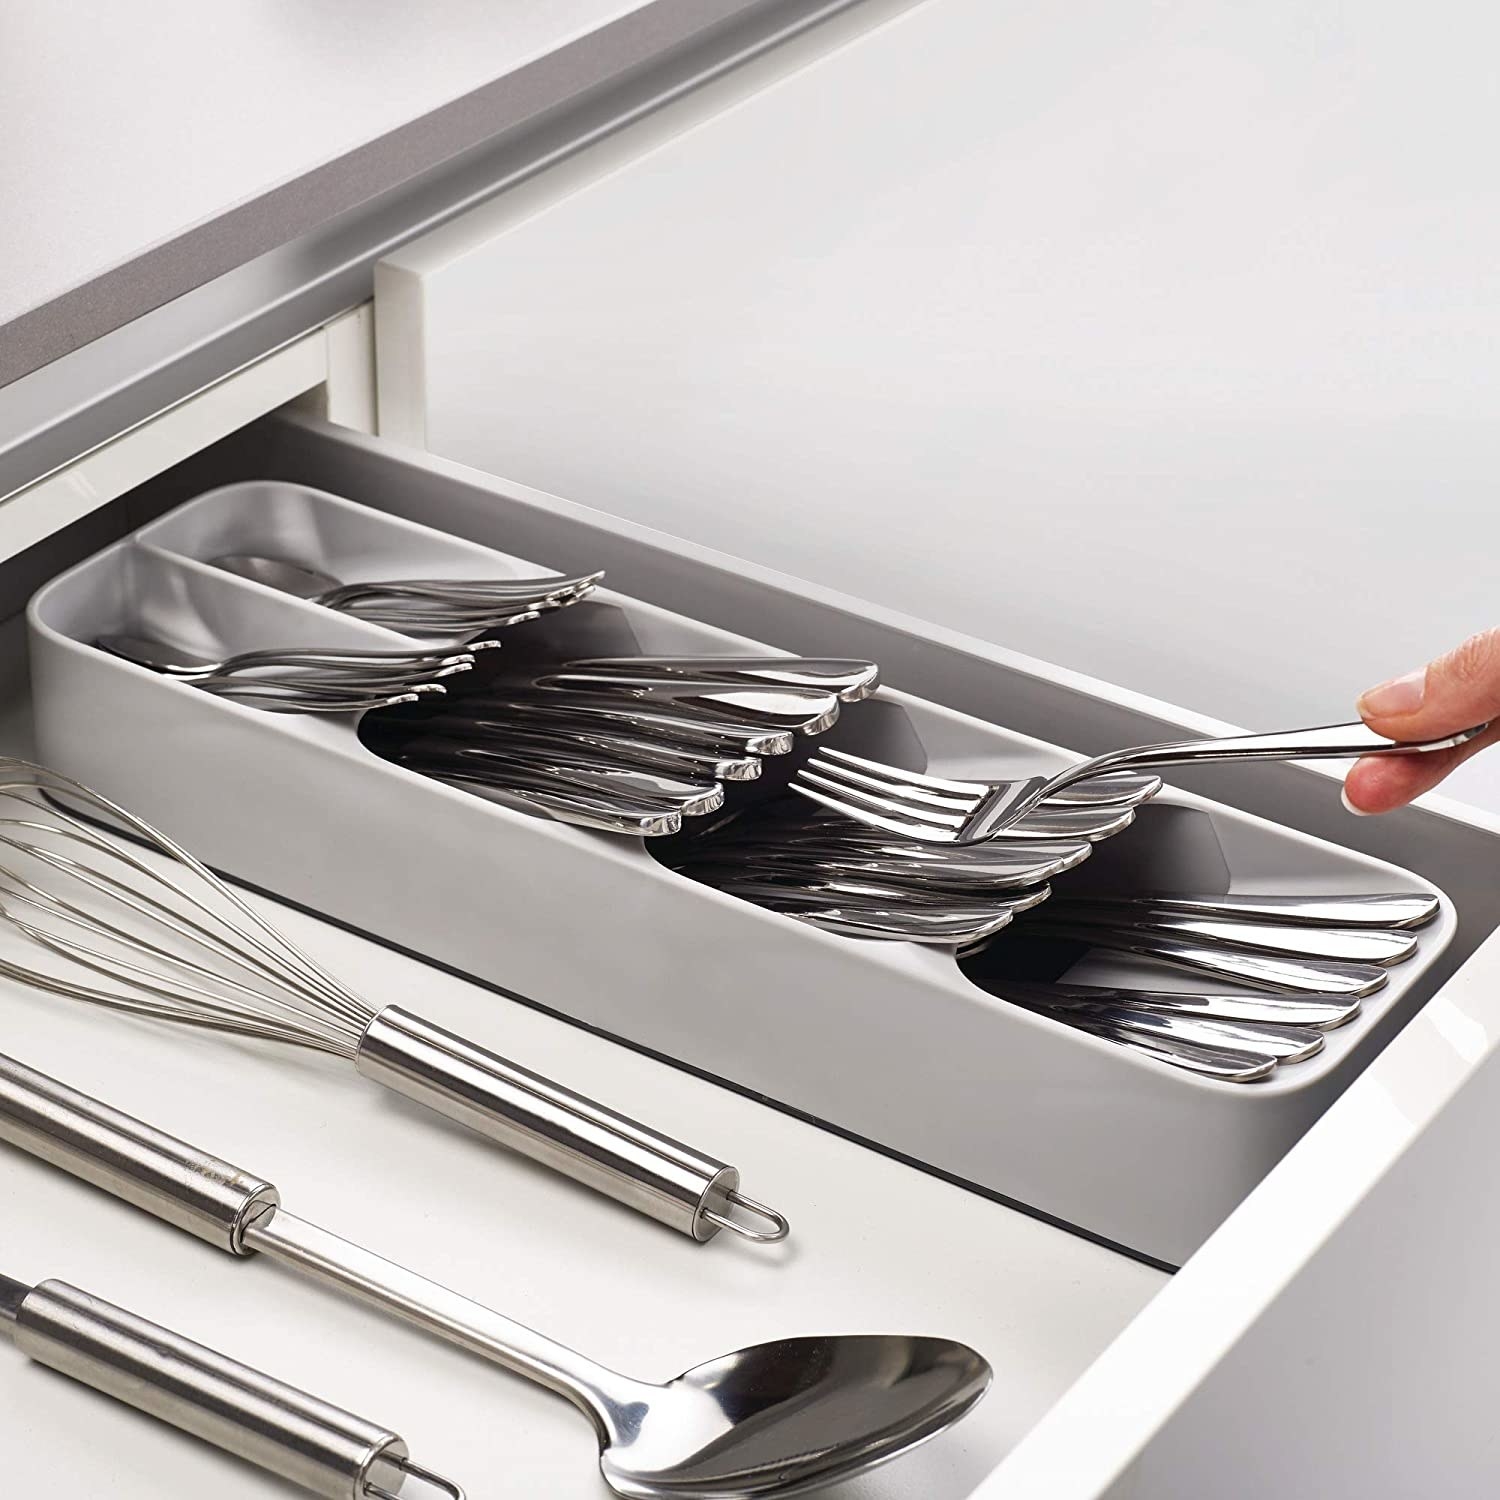 A person removes a fork from the stacked organizer